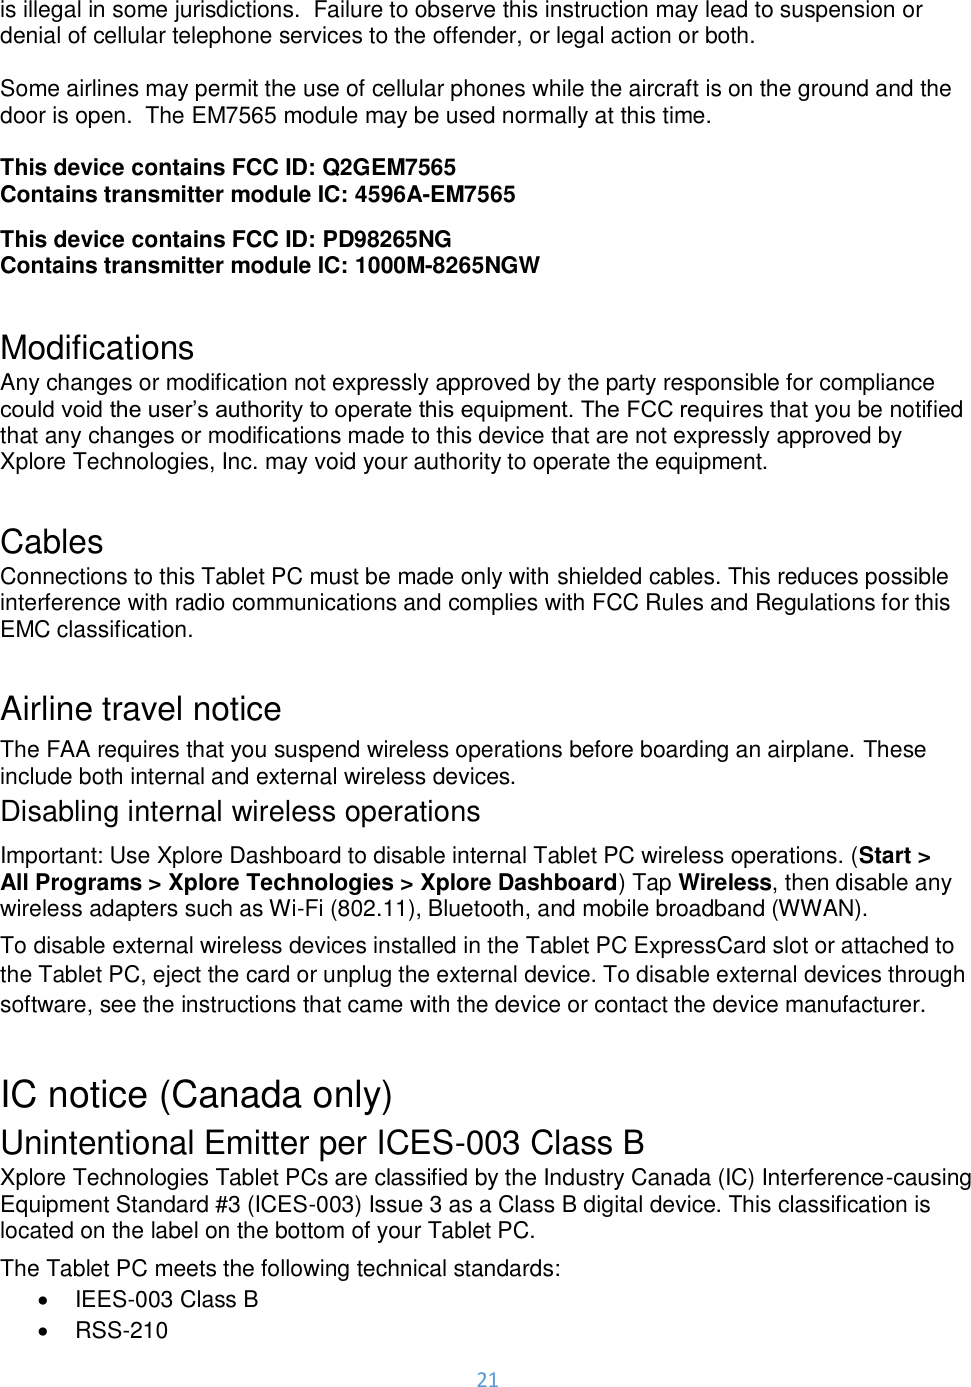 21  is illegal in some jurisdictions.  Failure to observe this instruction may lead to suspension or denial of cellular telephone services to the offender, or legal action or both.  Some airlines may permit the use of cellular phones while the aircraft is on the ground and the door is open.  The EM7565 module may be used normally at this time.  This device contains FCC ID: Q2GEM7565 Contains transmitter module IC: 4596A-EM7565 This device contains FCC ID: PD98265NG Contains transmitter module IC: 1000M-8265NGW  Modifications Any changes or modification not expressly approved by the party responsible for compliance could void the user’s authority to operate this equipment. The FCC requires that you be notified that any changes or modifications made to this device that are not expressly approved by Xplore Technologies, Inc. may void your authority to operate the equipment.   Cables Connections to this Tablet PC must be made only with shielded cables. This reduces possible interference with radio communications and complies with FCC Rules and Regulations for this EMC classification.  Airline travel notice The FAA requires that you suspend wireless operations before boarding an airplane. These include both internal and external wireless devices. Disabling internal wireless operations Important: Use Xplore Dashboard to disable internal Tablet PC wireless operations. (Start &gt; All Programs &gt; Xplore Technologies &gt; Xplore Dashboard) Tap Wireless, then disable any wireless adapters such as Wi-Fi (802.11), Bluetooth, and mobile broadband (WWAN). To disable external wireless devices installed in the Tablet PC ExpressCard slot or attached to the Tablet PC, eject the card or unplug the external device. To disable external devices through software, see the instructions that came with the device or contact the device manufacturer.  IC notice (Canada only)  Unintentional Emitter per ICES-003 Class B Xplore Technologies Tablet PCs are classified by the Industry Canada (IC) Interference-causing Equipment Standard #3 (ICES-003) Issue 3 as a Class B digital device. This classification is located on the label on the bottom of your Tablet PC.  The Tablet PC meets the following technical standards: •  IEES-003 Class B •  RSS-210 